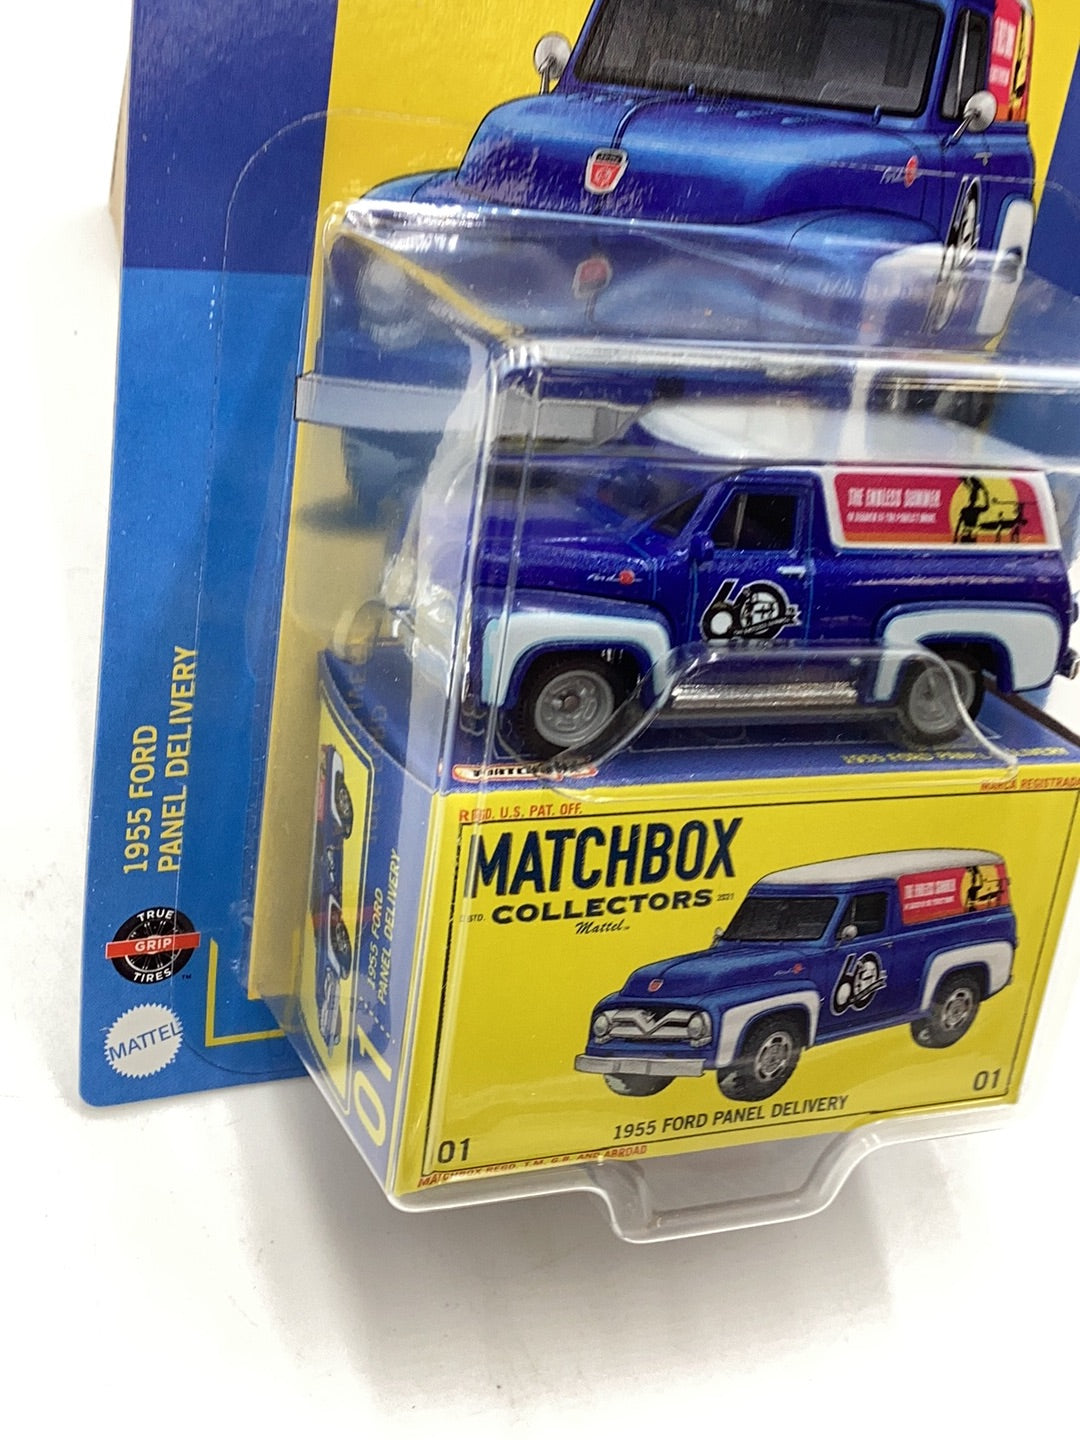 2023 matchbox Collectors 1955 Ford Panel Delivery 1/20 171I